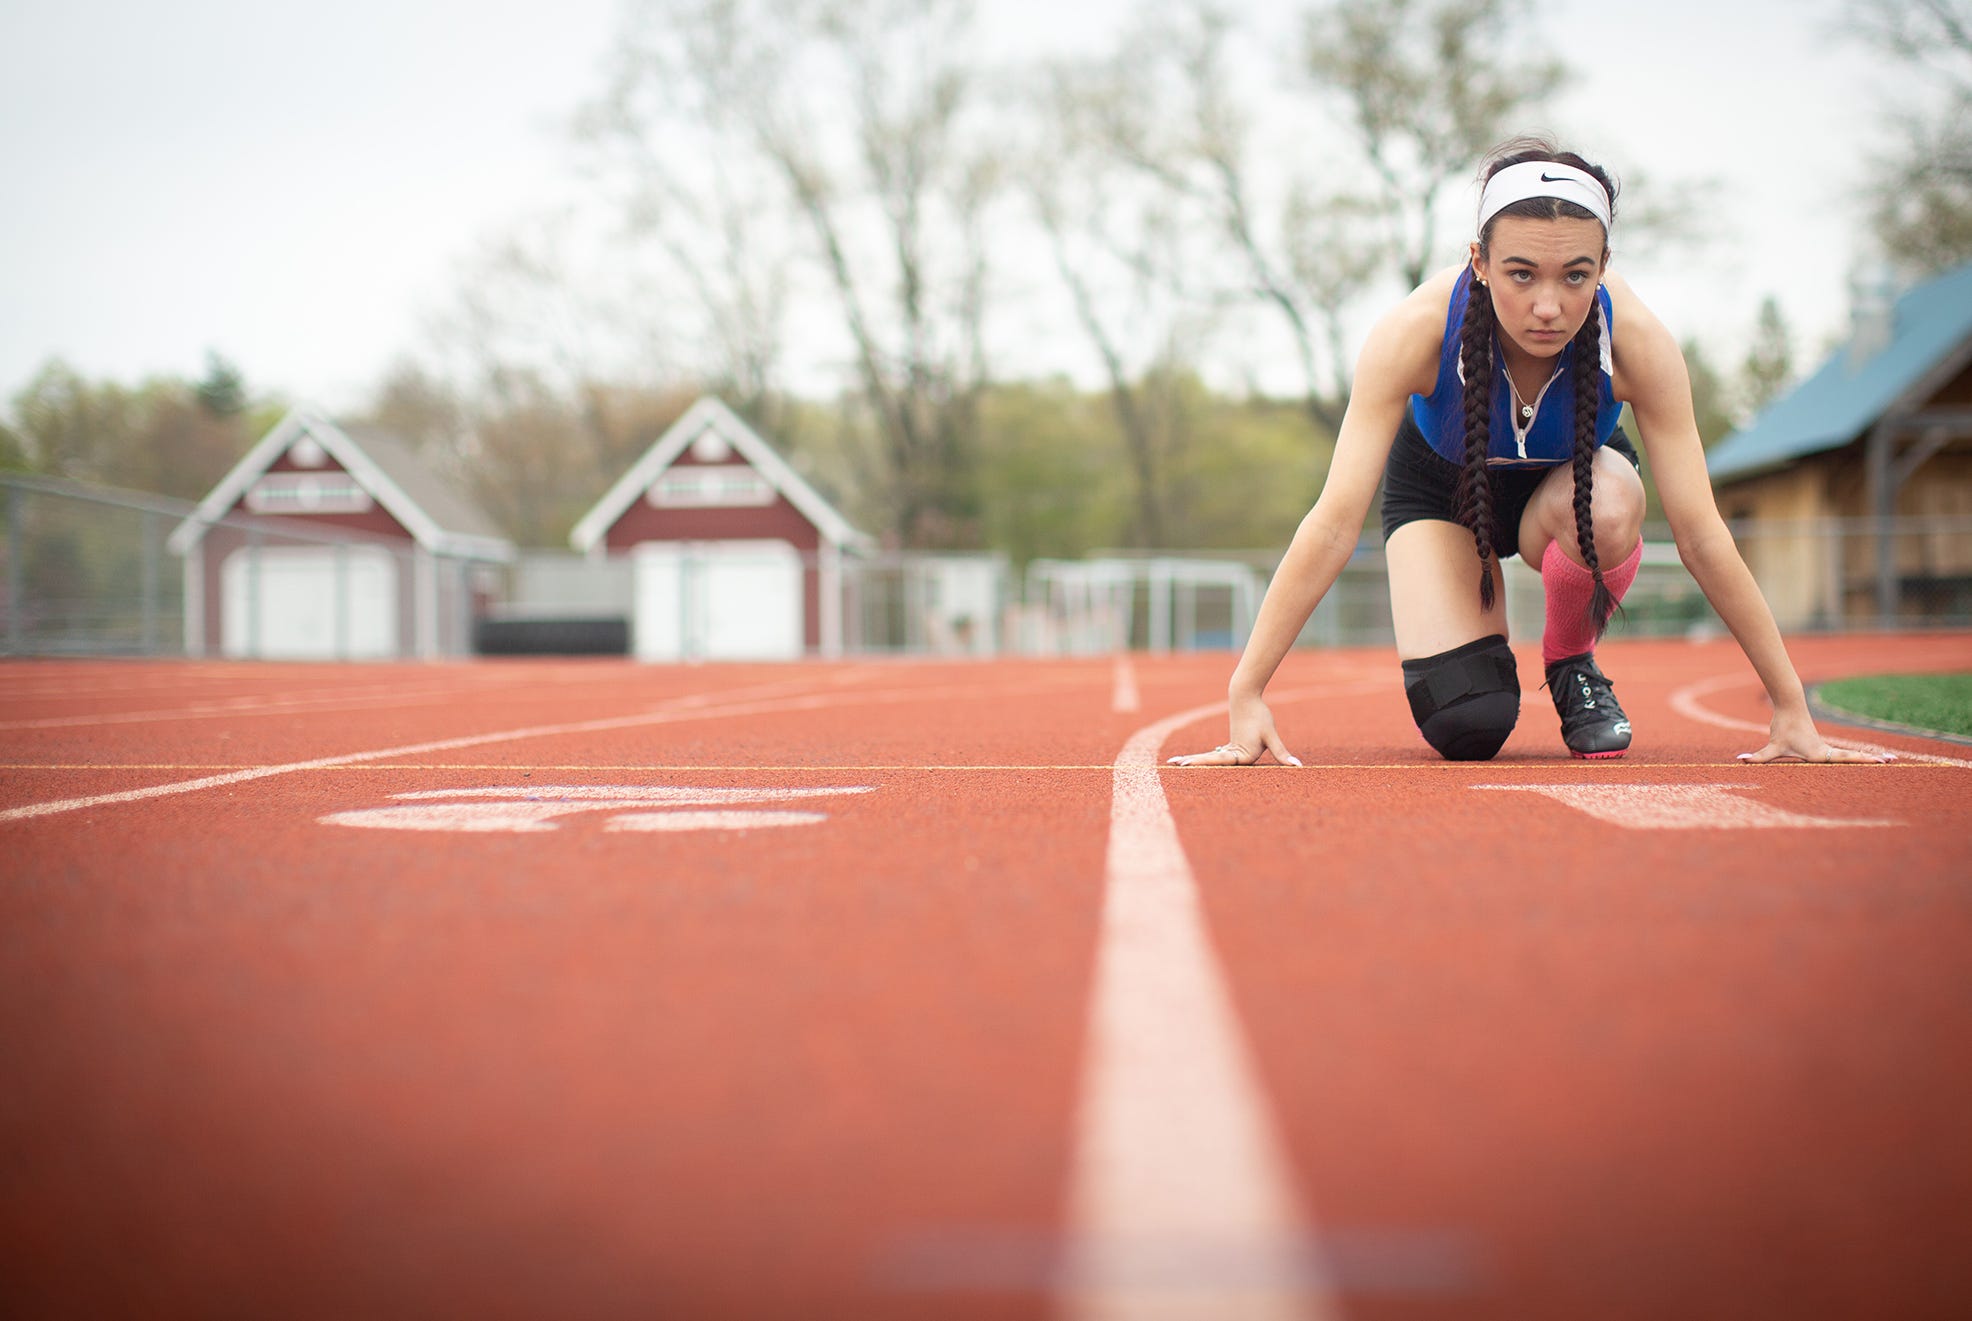 Transgender Athletes Rob Girls Of The Chance To Compete Fairly